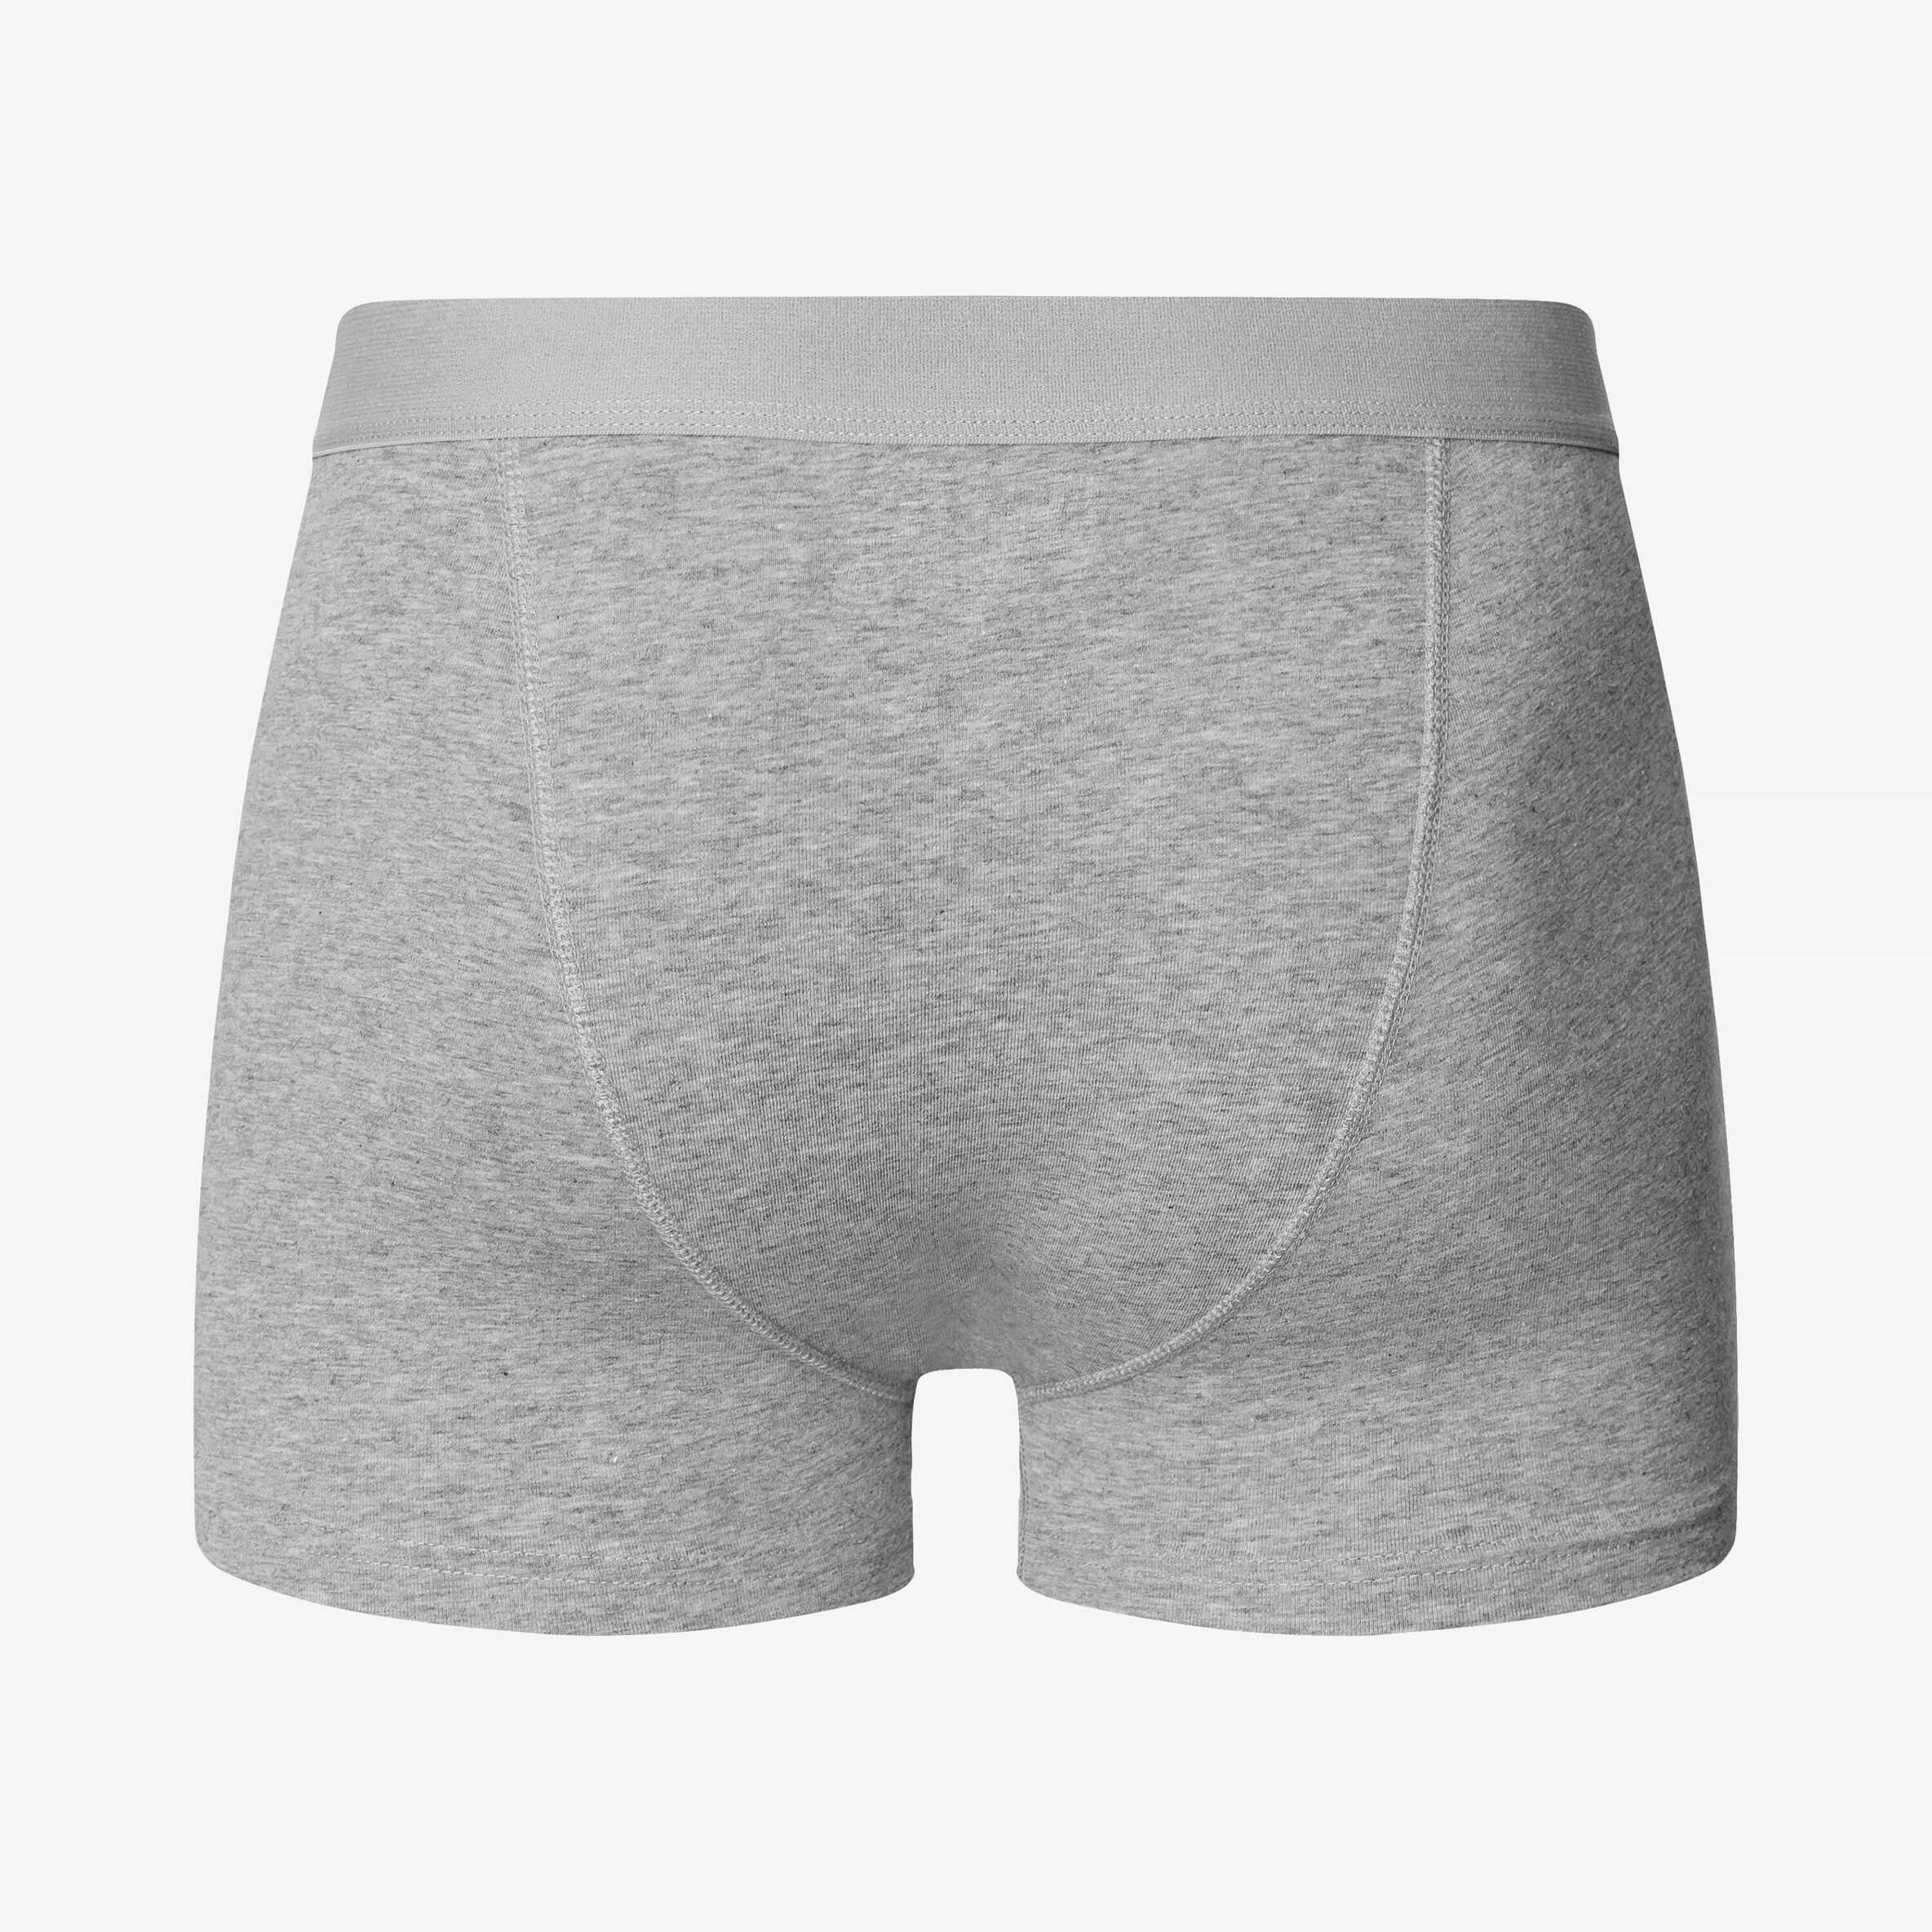 Grey Boxer Brief underpants made of organic cotton and elastane - Bread ...